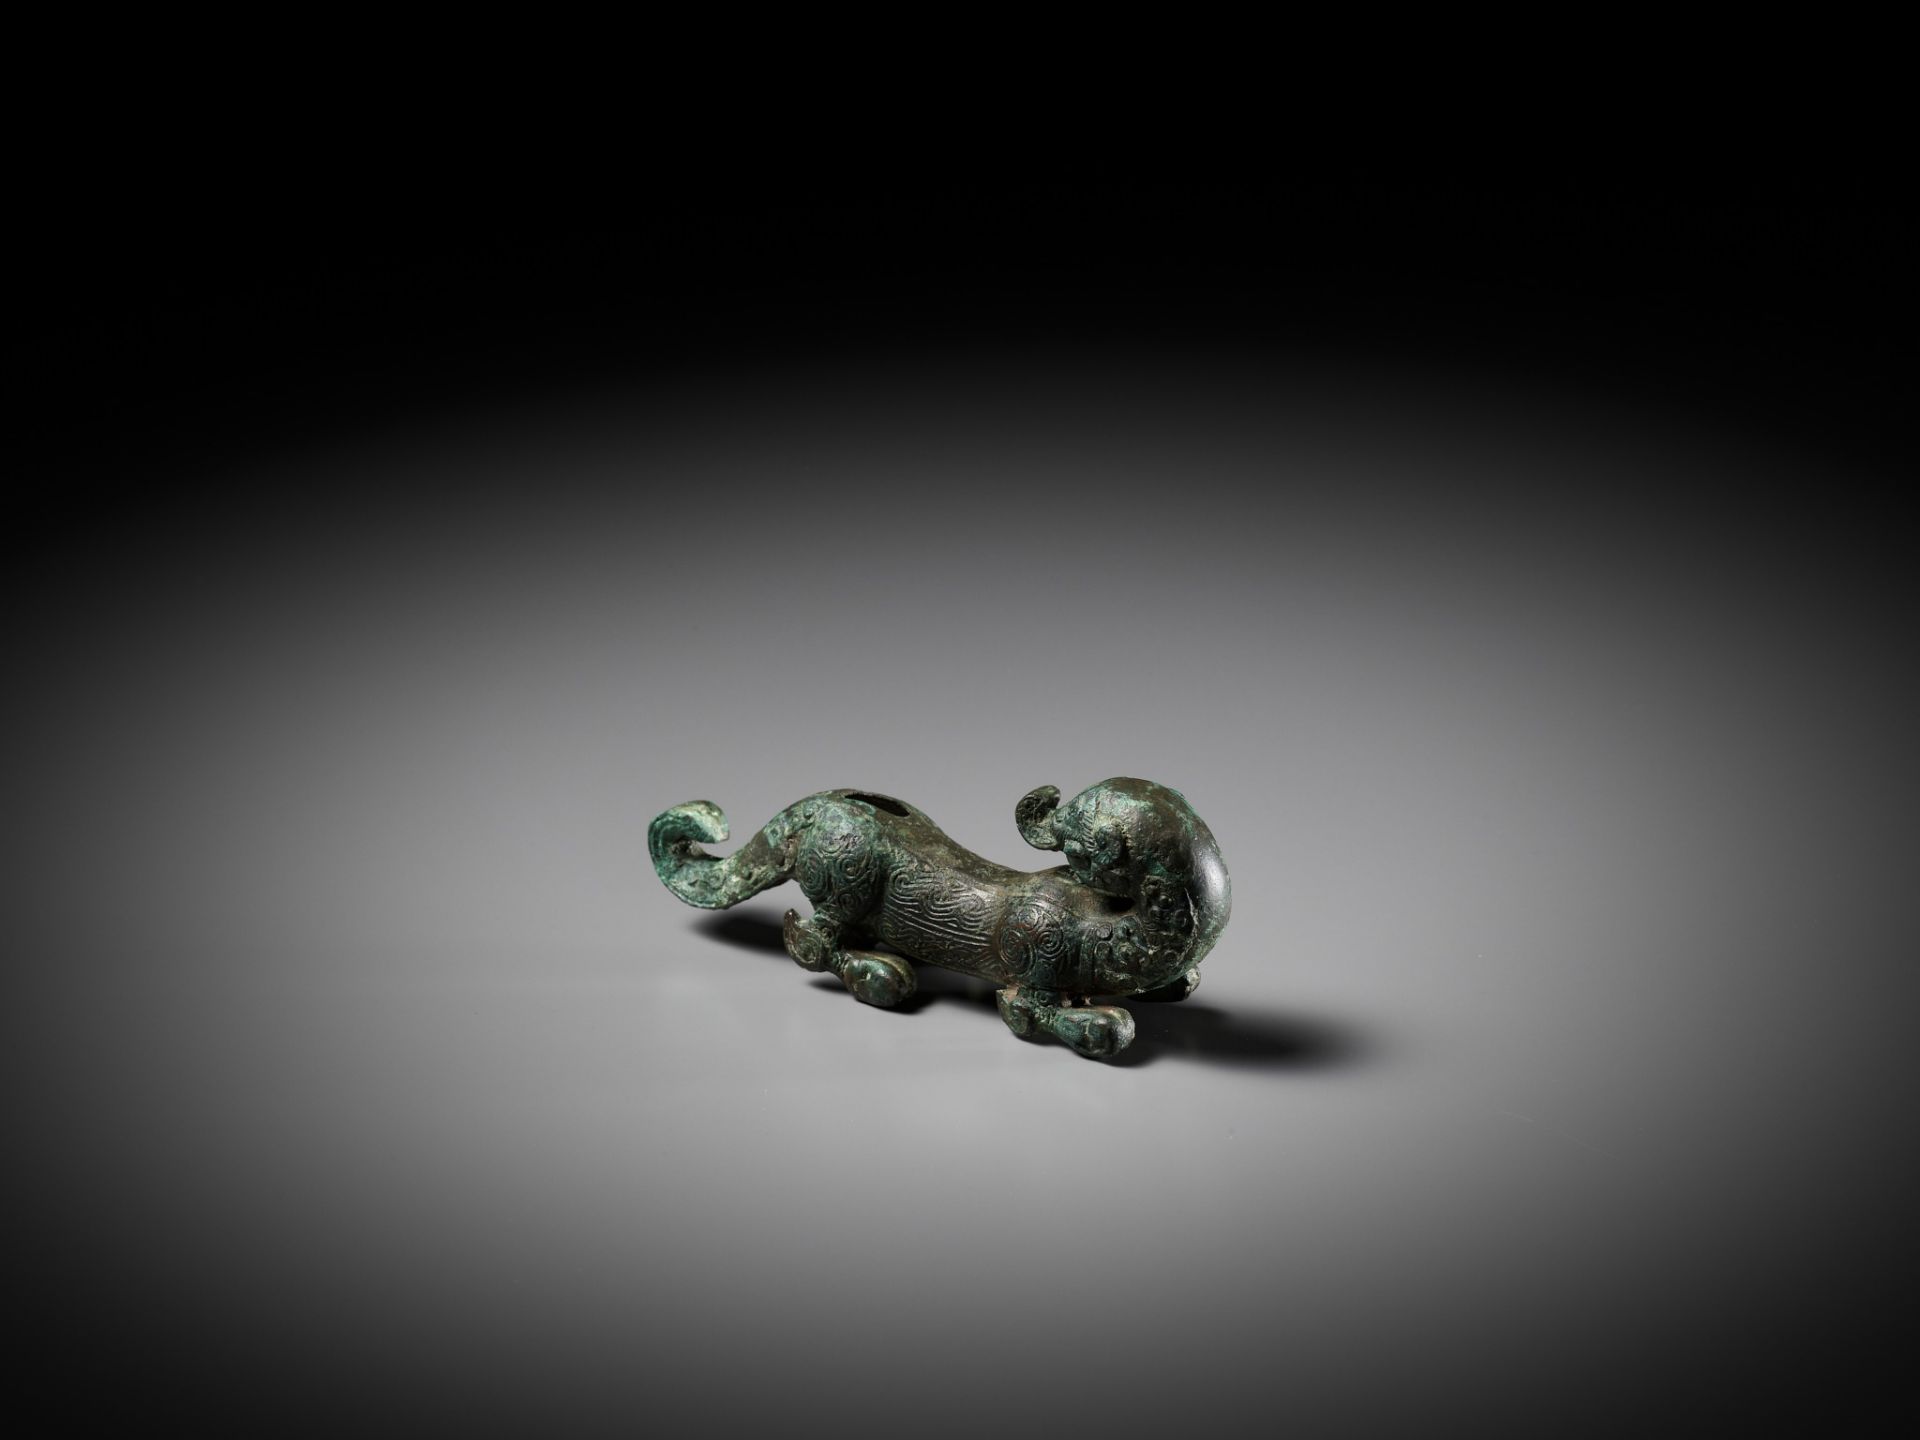 A SUPERB BRONZE FIGURE OF A DRAGON, EASTERN ZHOU DYNASTY, CHINA, 770-256 BC - Image 11 of 25